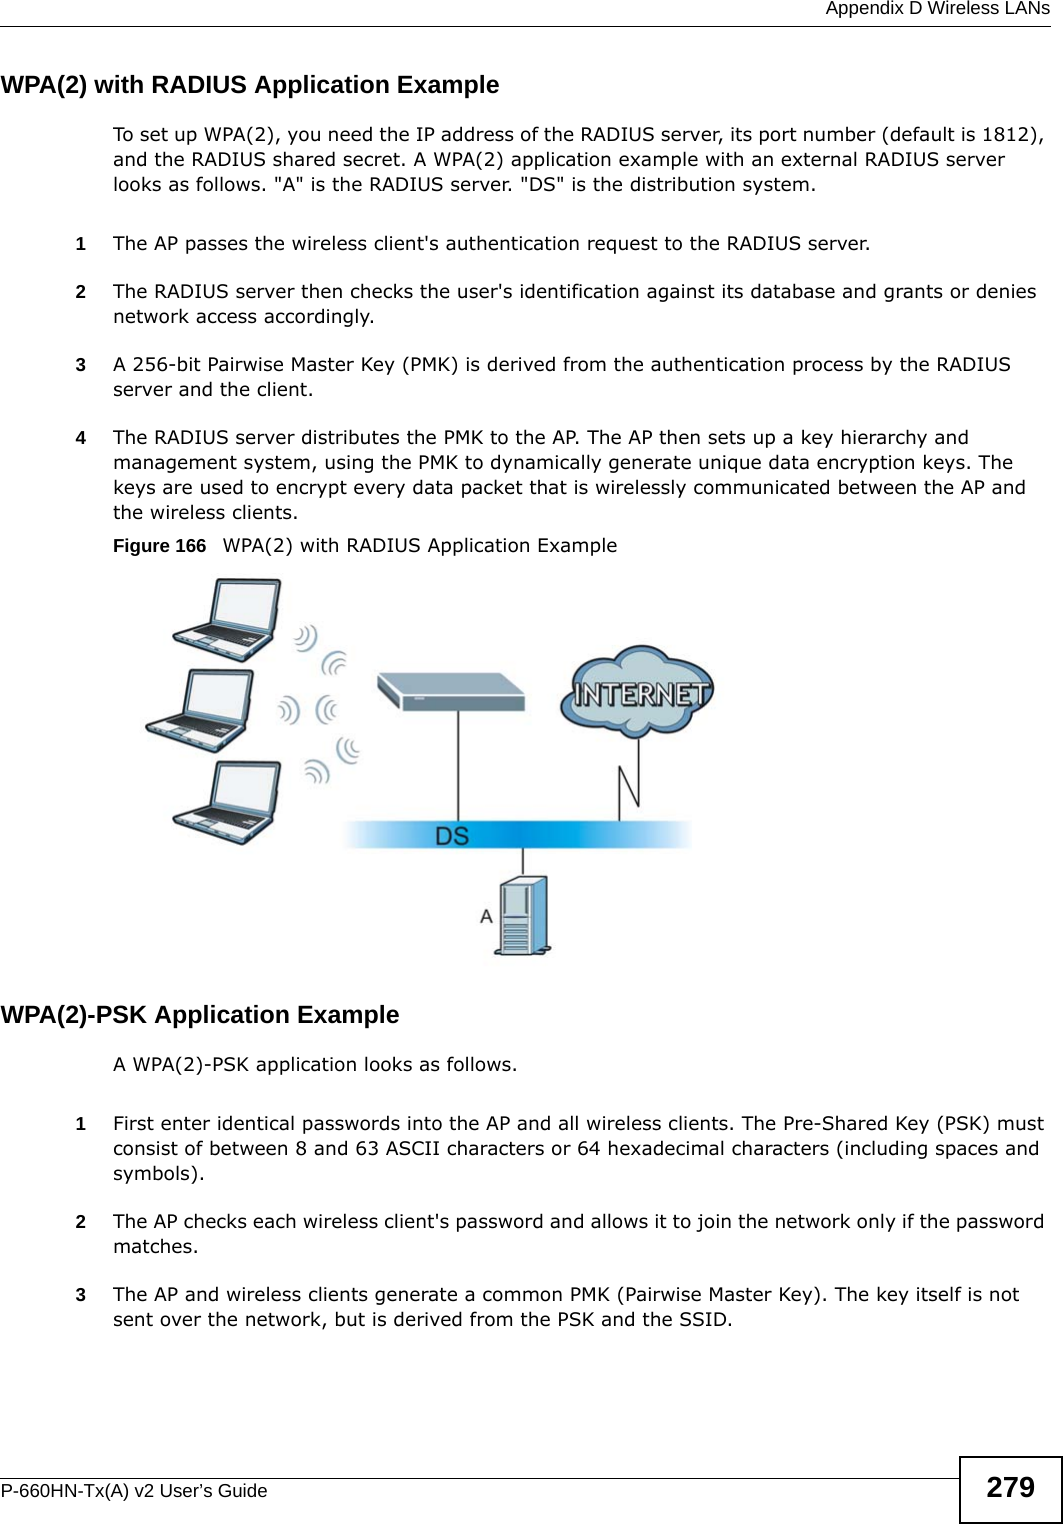  Appendix D Wireless LANsP-660HN-Tx(A) v2 User’s Guide 279WPA(2) with RADIUS Application ExampleTo set up WPA(2), you need the IP address of the RADIUS server, its port number (default is 1812), and the RADIUS shared secret. A WPA(2) application example with an external RADIUS server looks as follows. &quot;A&quot; is the RADIUS server. &quot;DS&quot; is the distribution system.1The AP passes the wireless client&apos;s authentication request to the RADIUS server.2The RADIUS server then checks the user&apos;s identification against its database and grants or denies network access accordingly.3A 256-bit Pairwise Master Key (PMK) is derived from the authentication process by the RADIUS server and the client.4The RADIUS server distributes the PMK to the AP. The AP then sets up a key hierarchy and management system, using the PMK to dynamically generate unique data encryption keys. The keys are used to encrypt every data packet that is wirelessly communicated between the AP and the wireless clients.Figure 166   WPA(2) with RADIUS Application ExampleWPA(2)-PSK Application ExampleA WPA(2)-PSK application looks as follows.1First enter identical passwords into the AP and all wireless clients. The Pre-Shared Key (PSK) must consist of between 8 and 63 ASCII characters or 64 hexadecimal characters (including spaces and symbols).2The AP checks each wireless client&apos;s password and allows it to join the network only if the password matches.3The AP and wireless clients generate a common PMK (Pairwise Master Key). The key itself is not sent over the network, but is derived from the PSK and the SSID. 